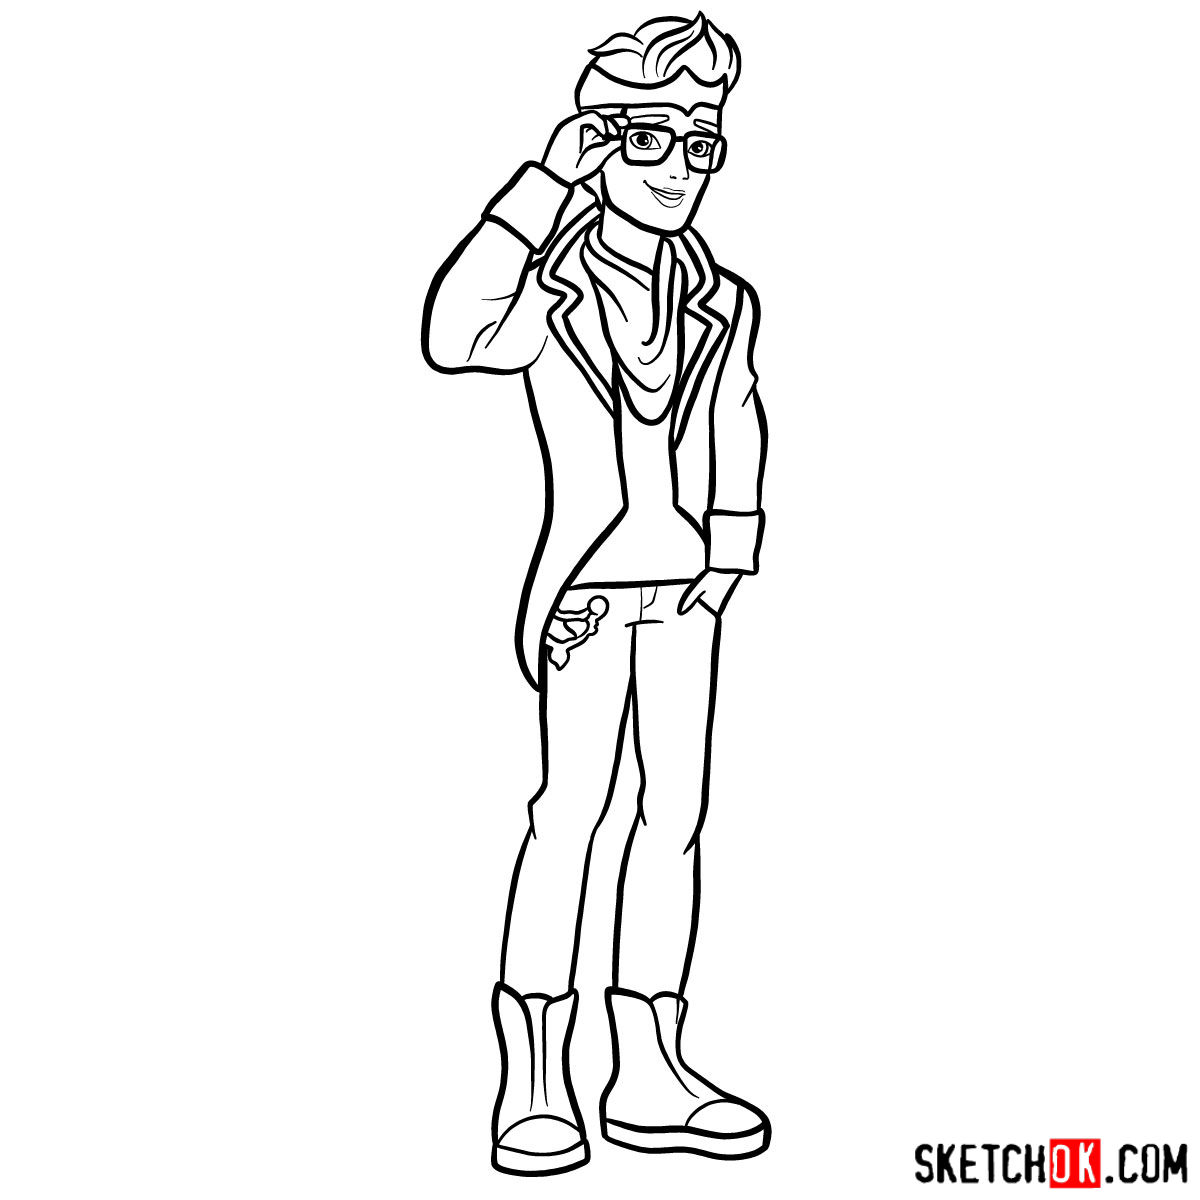 How to draw Dexter Charming - step 13